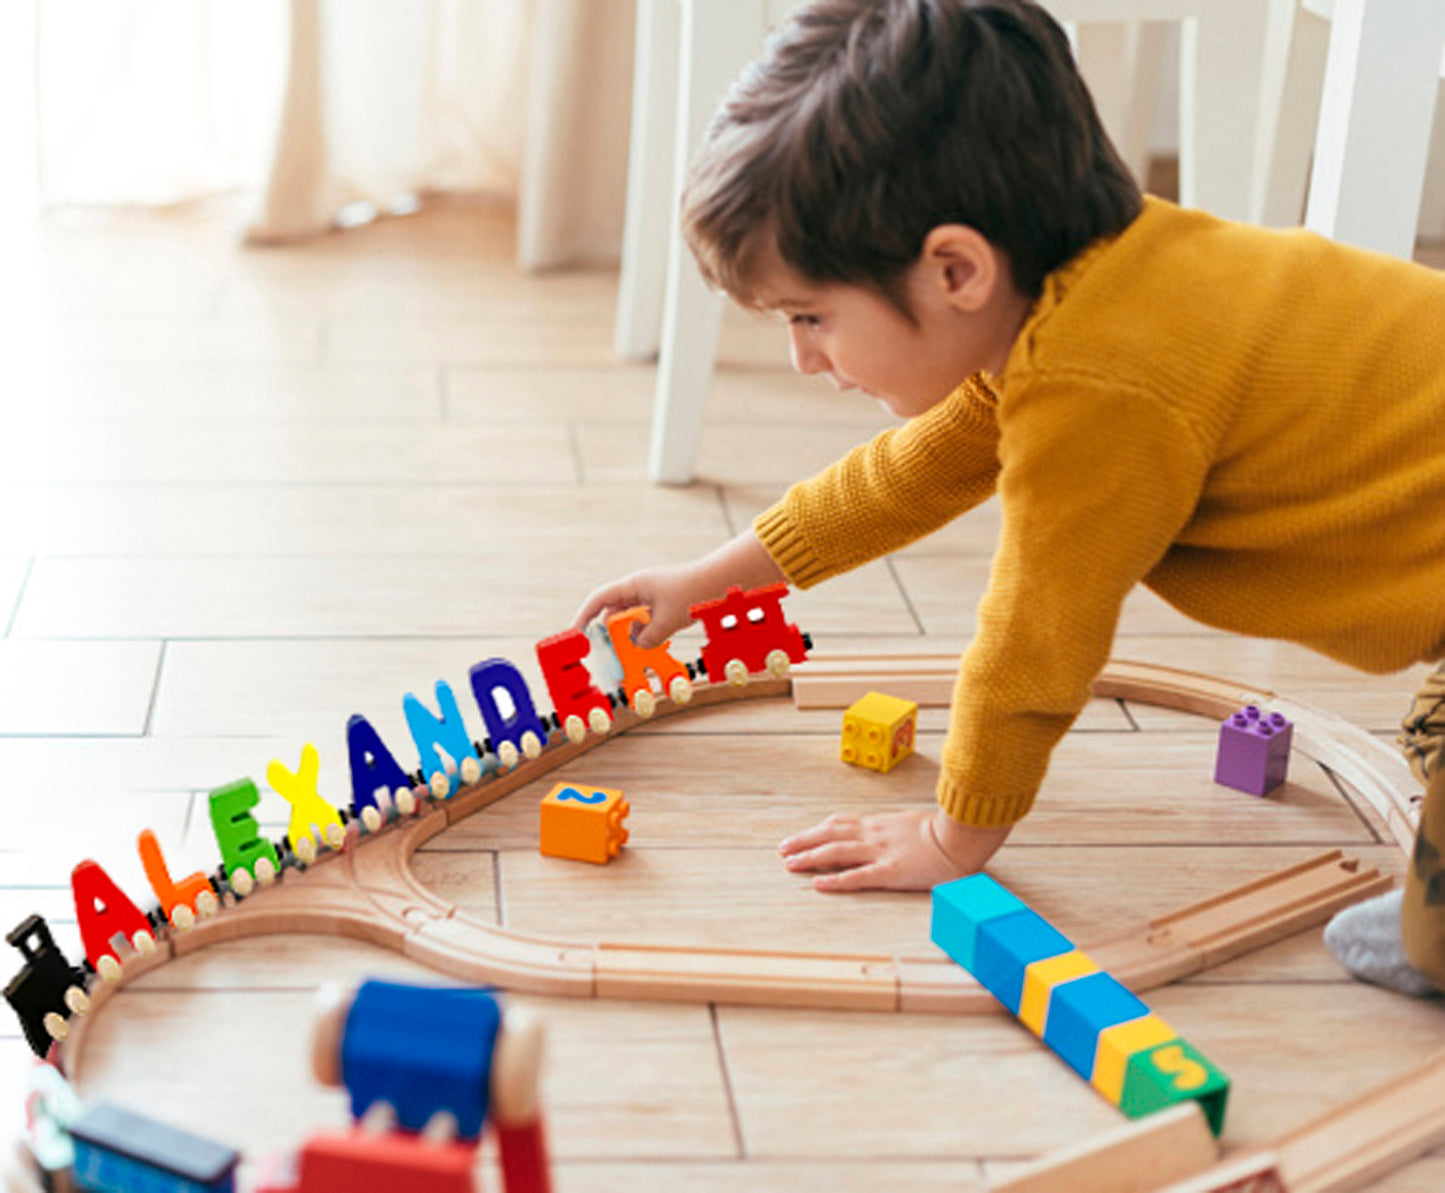 7 Letter Train Wooden Perosnalized Name Letters Includes Train & Wagon Letters Puzzle Includes Train & Wagon Free